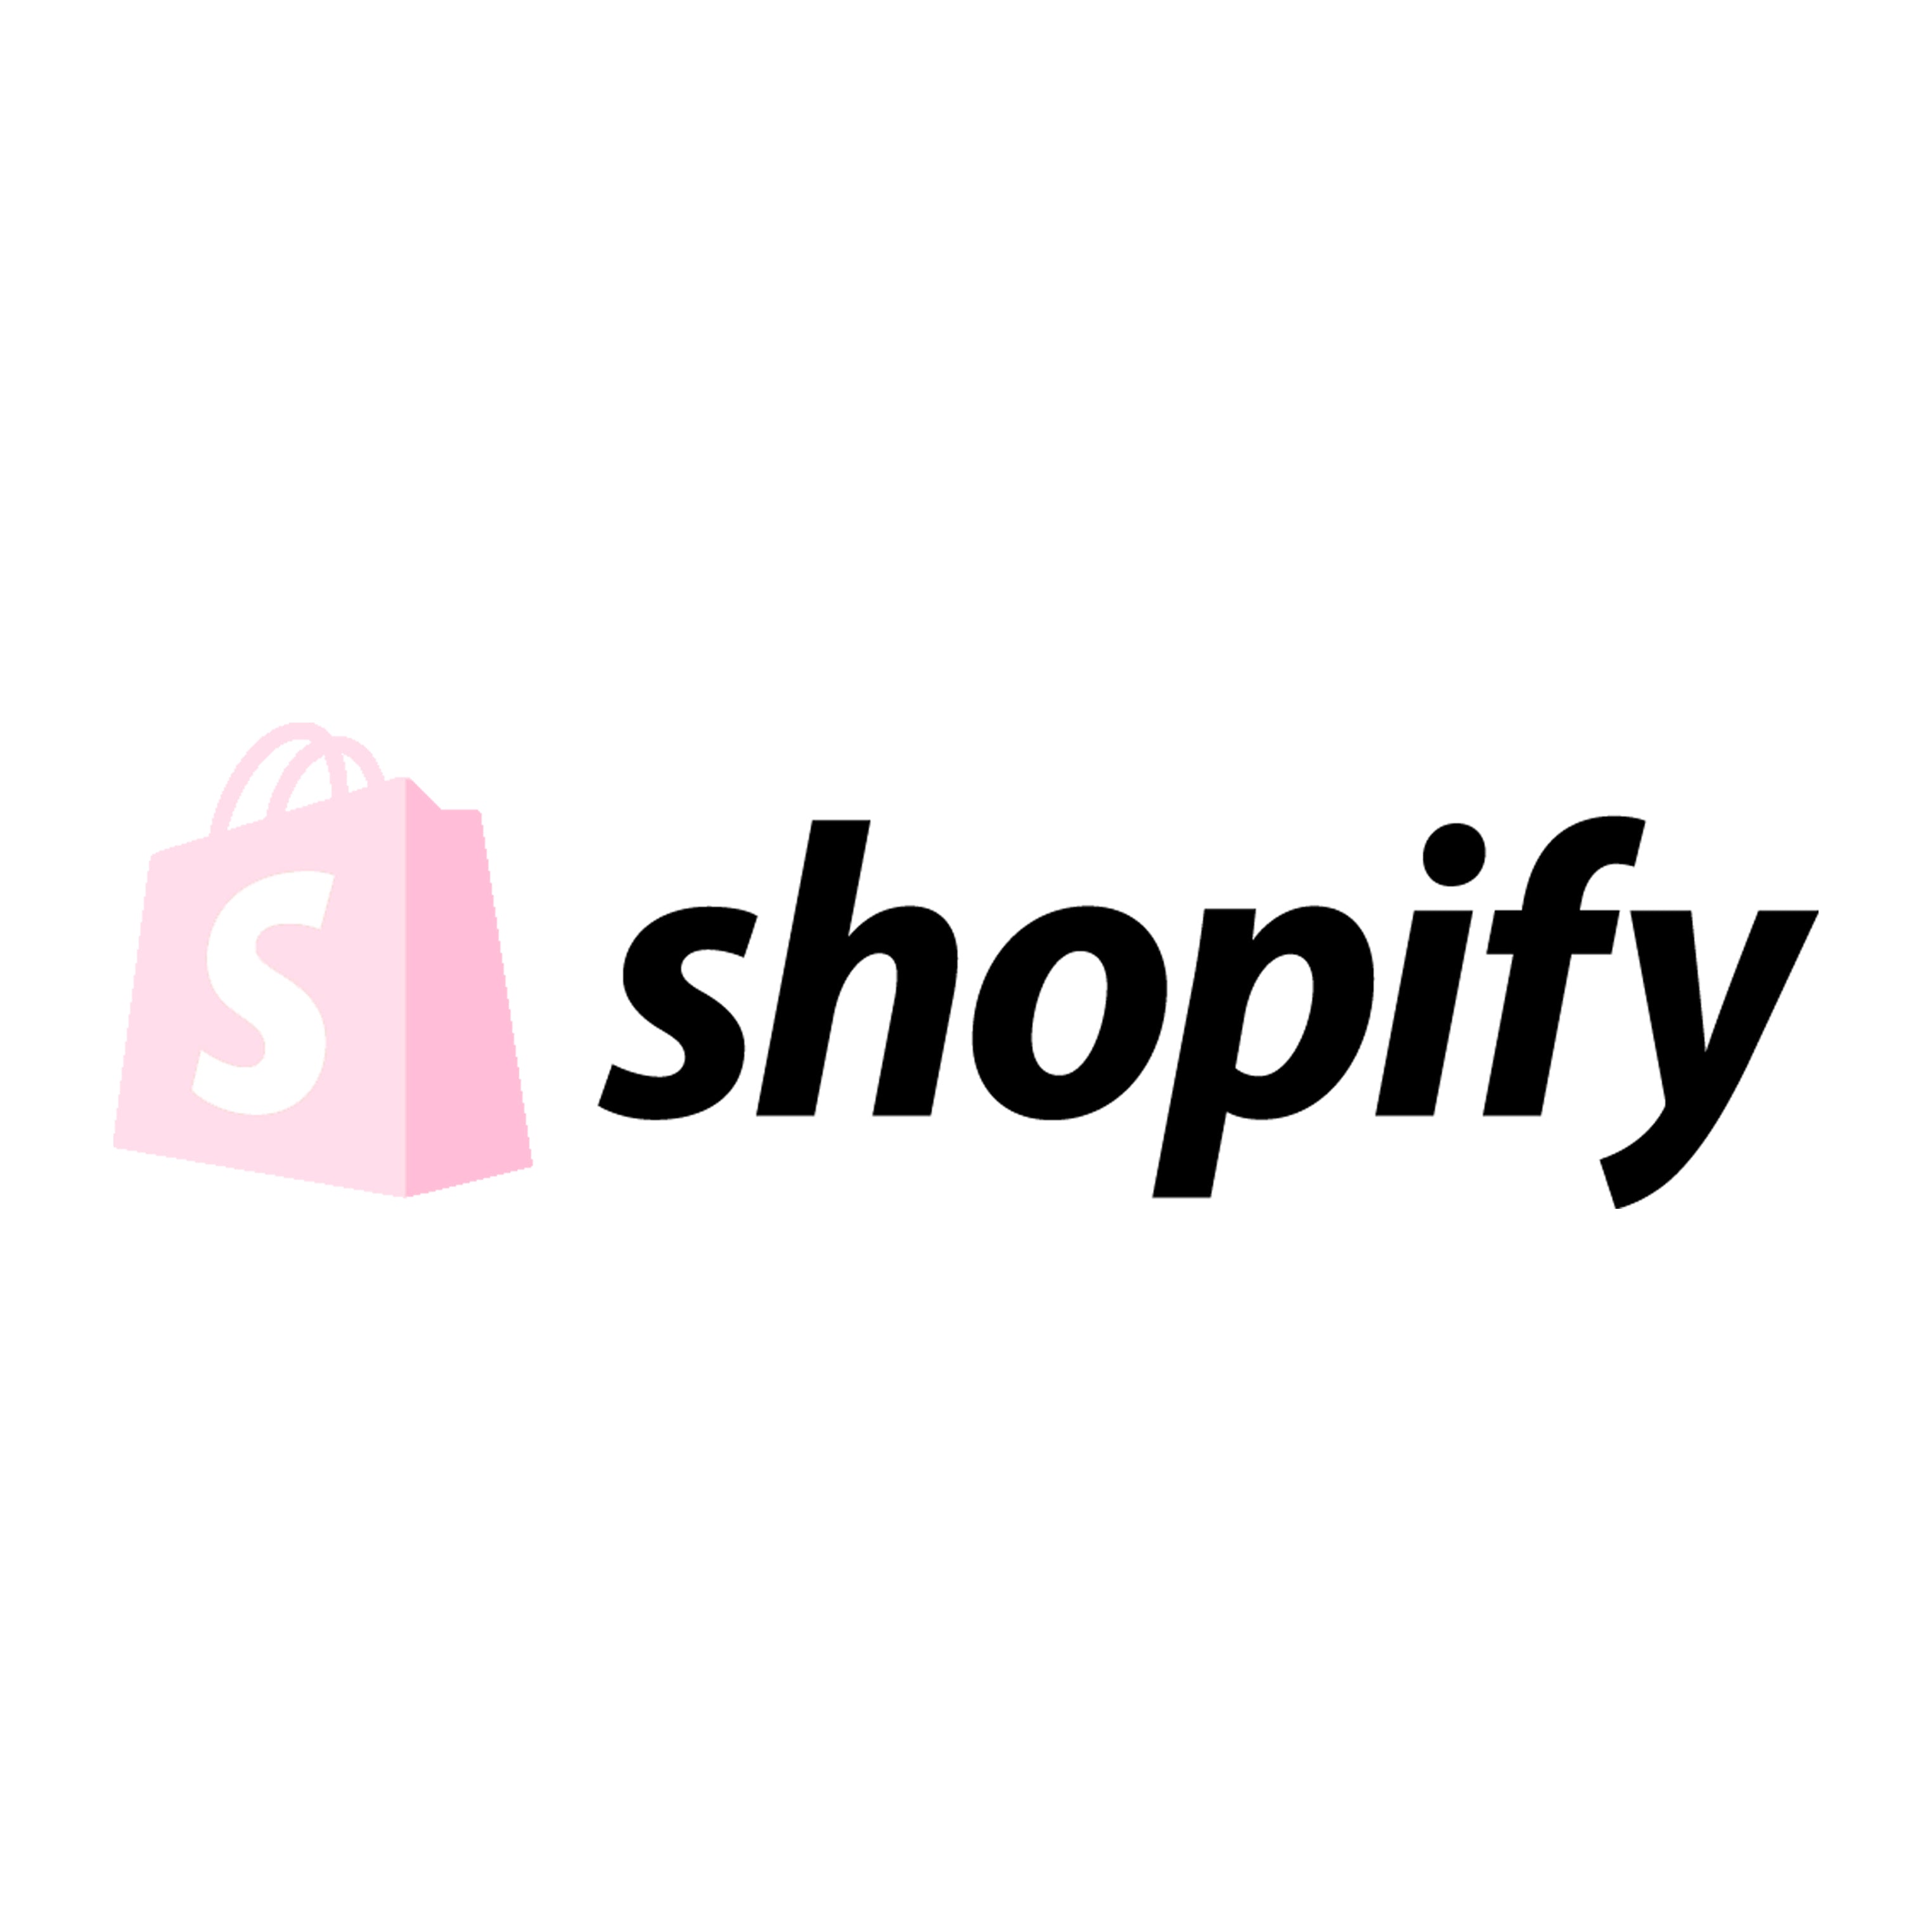 How to setup shopify payments